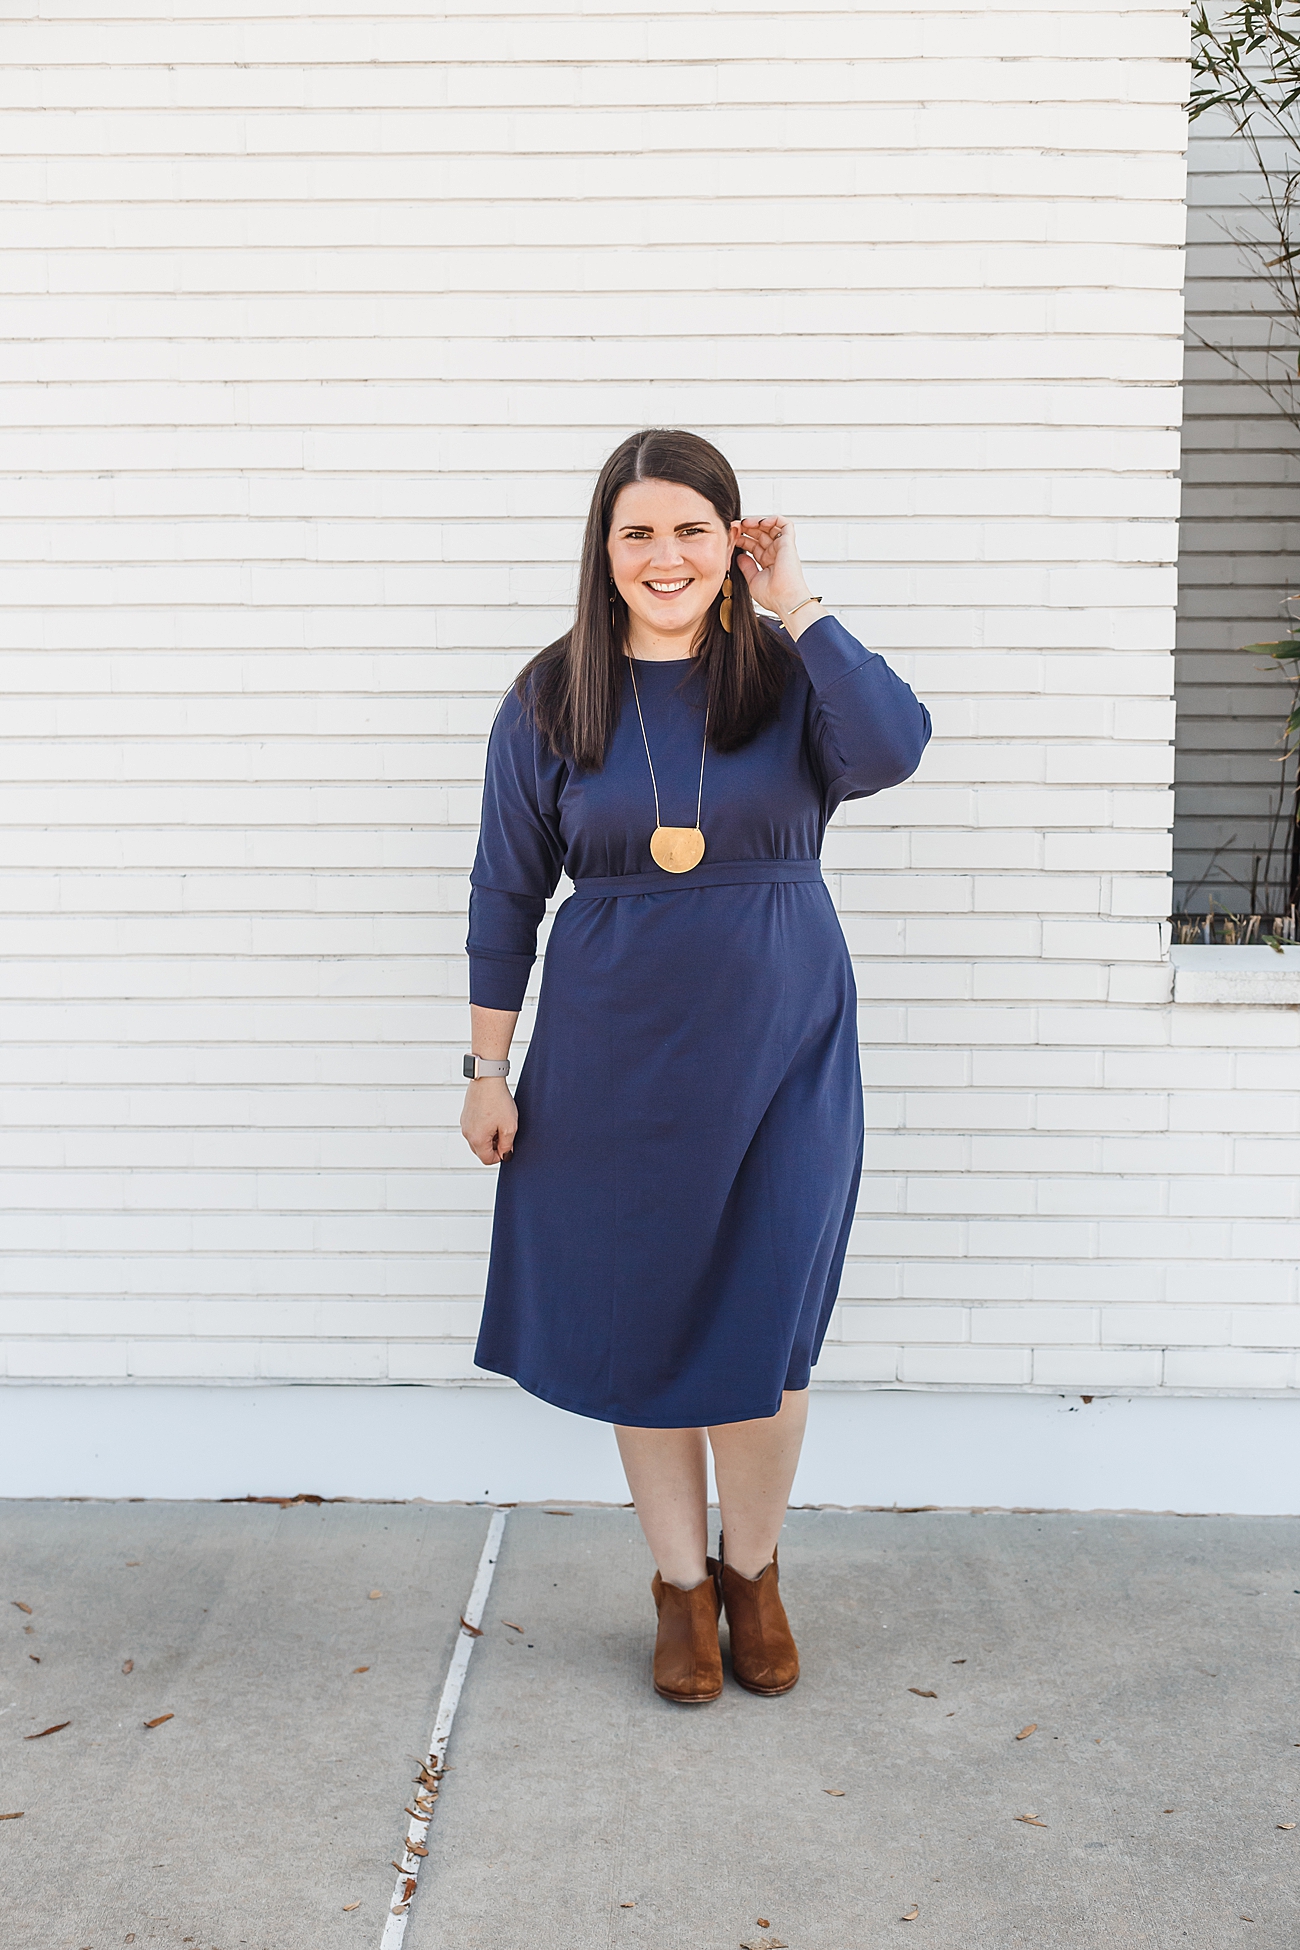 The Elegantees "Molly" Dress is Here! | Beautiful, versatile, ethically made dress (58)